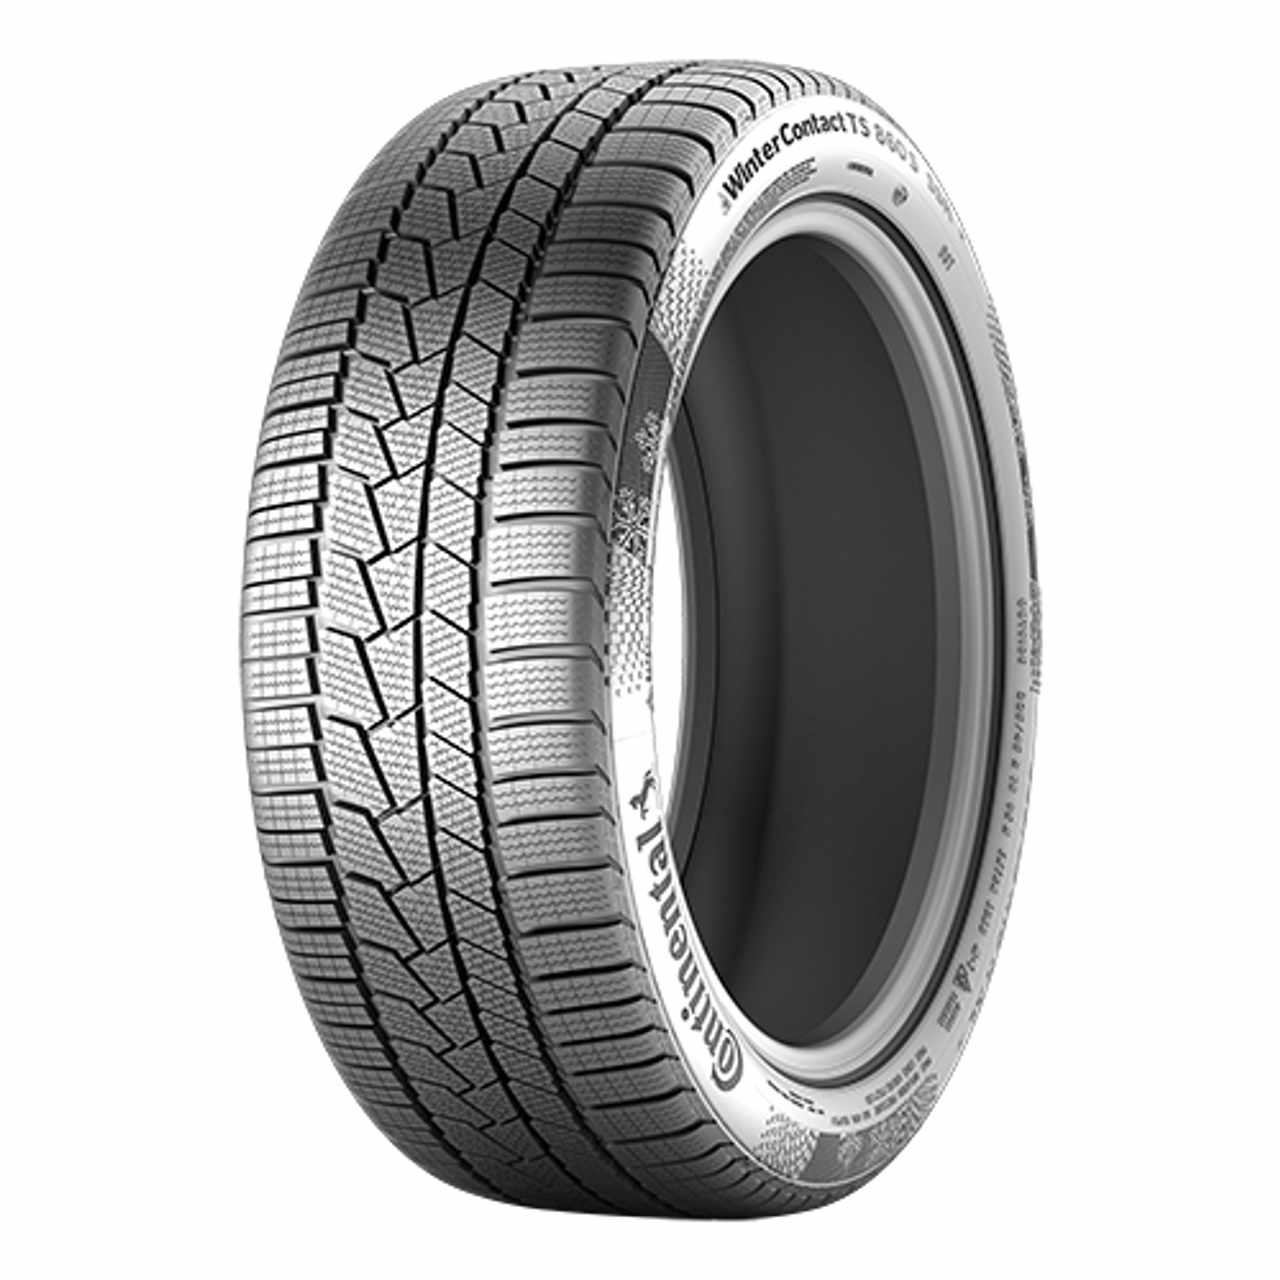 CONTINENTAL WINTERCONTACT TS 860 S (NF0) (EVc) 265/35R21 103V FR BSW